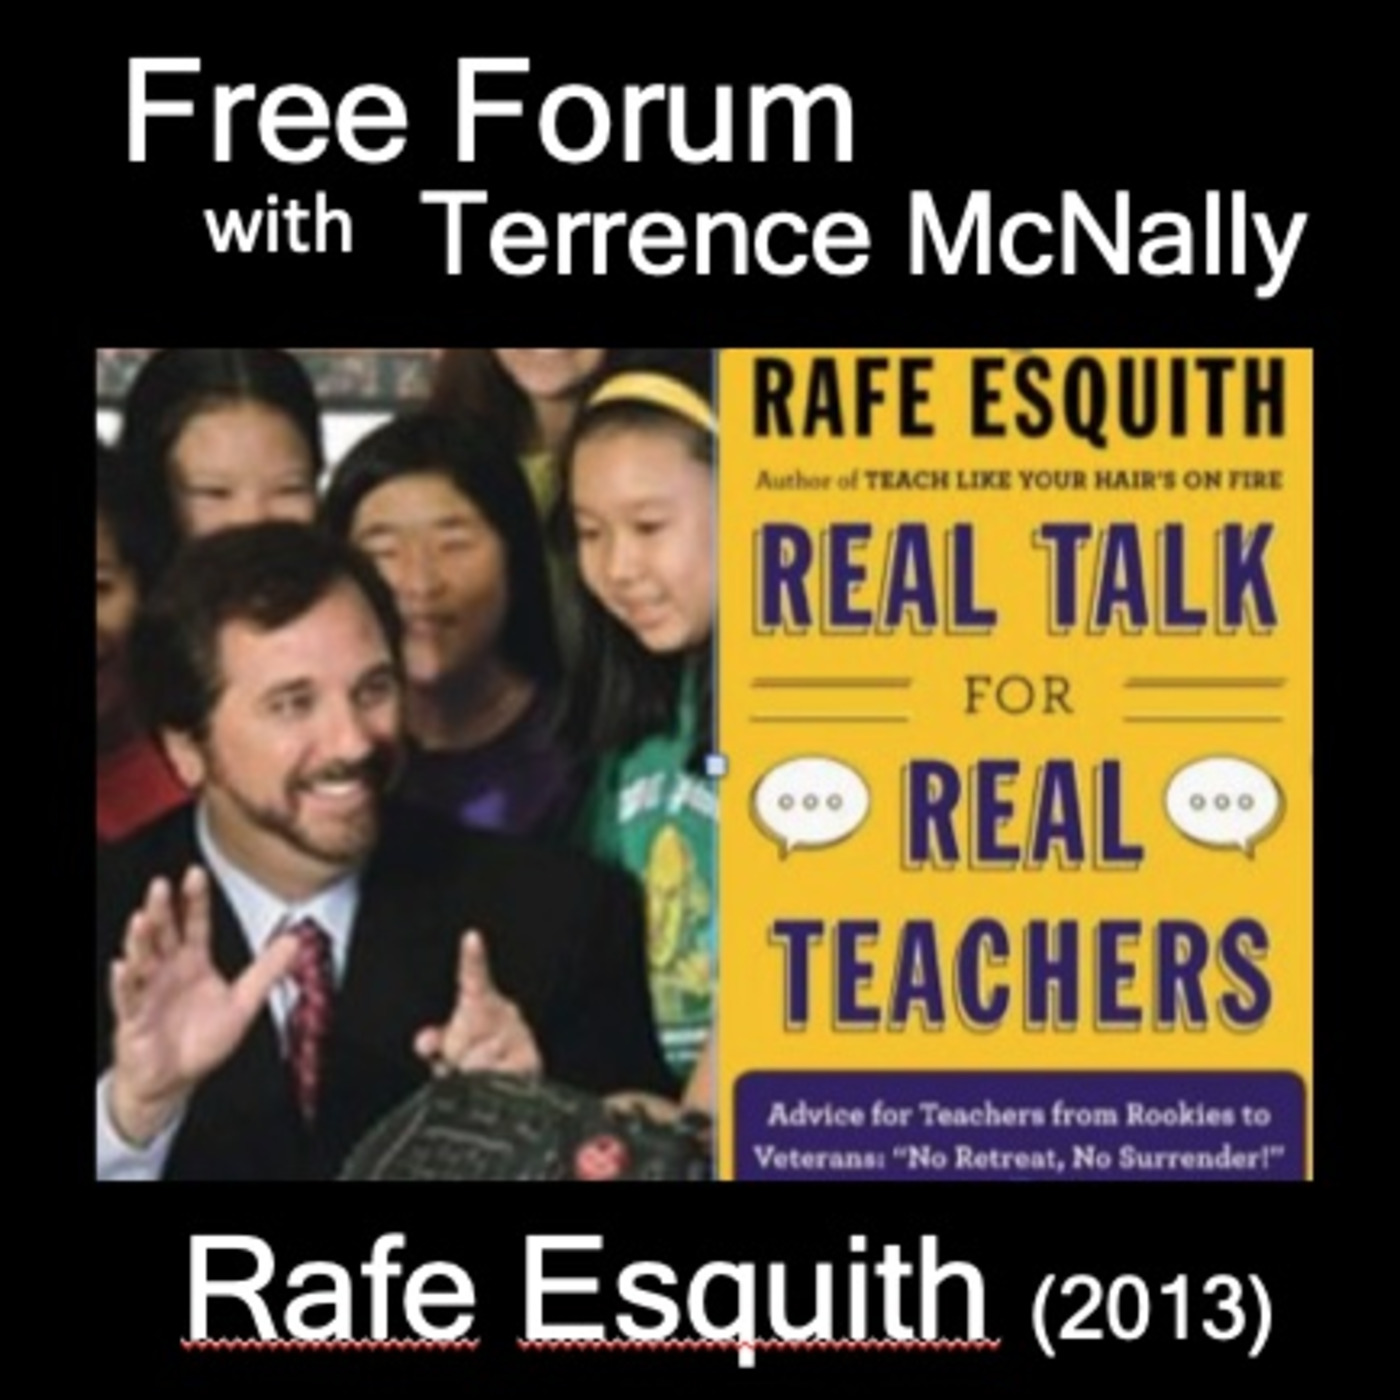 Episode 568: Back to School-RAFE ESQUITH (2013) REAL TALK FOR REAL TEACHERS